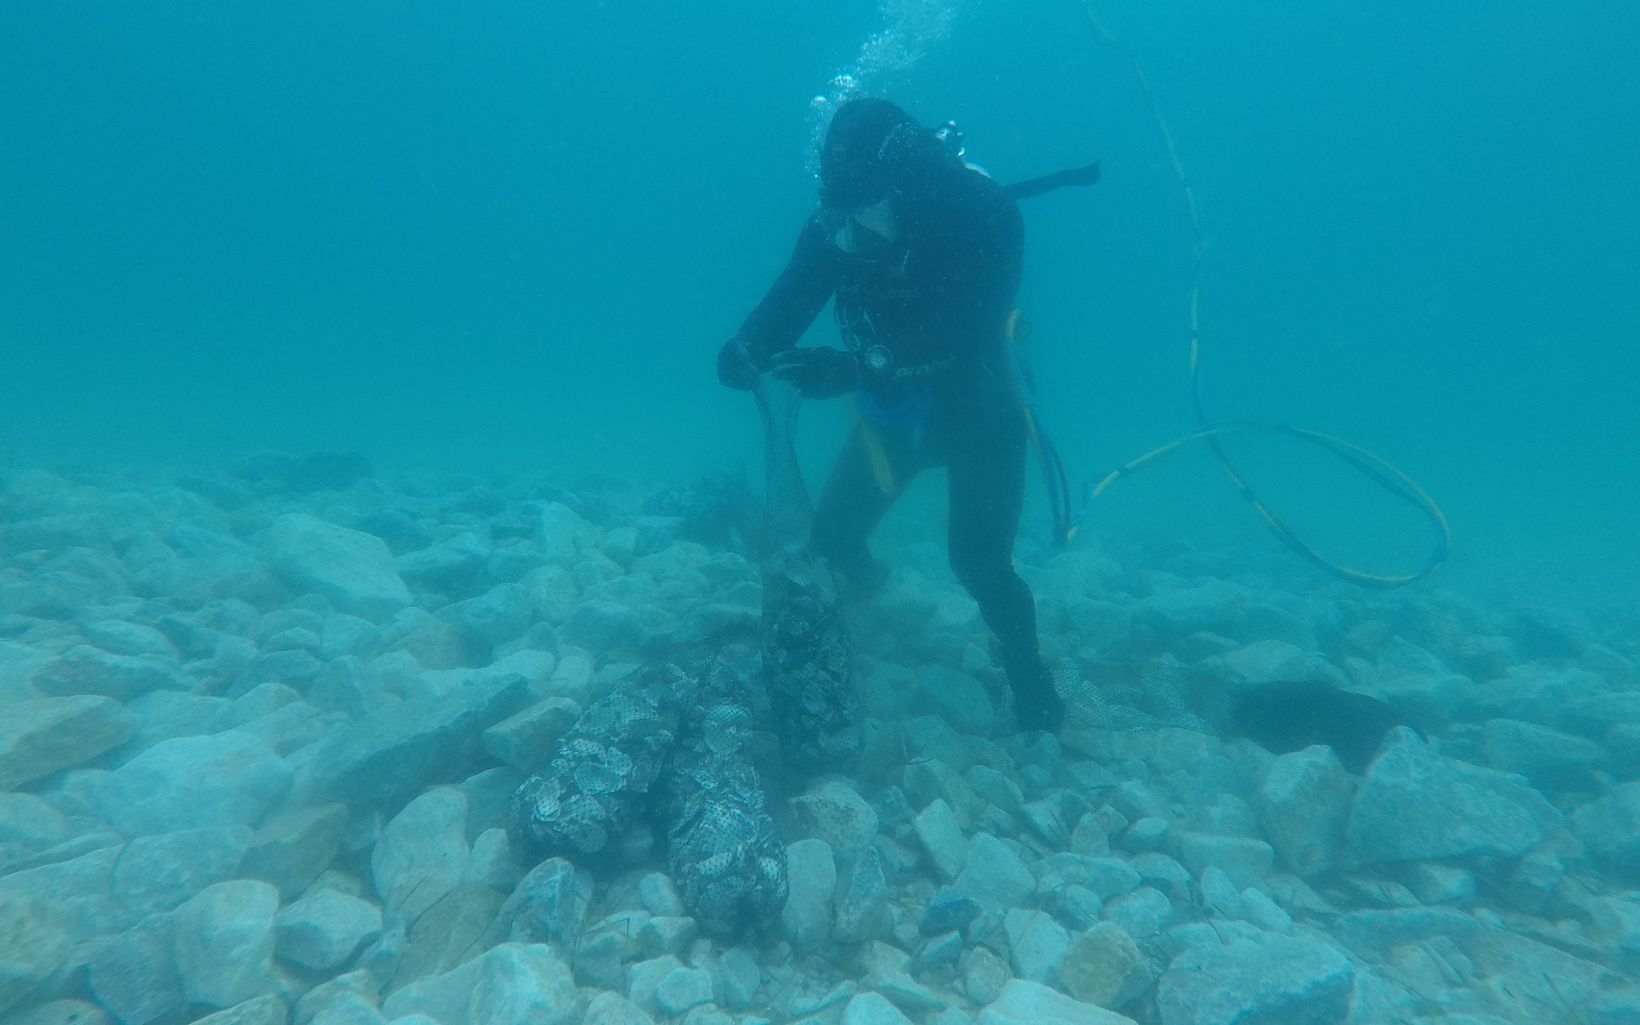 A diver placing oysters on a reef